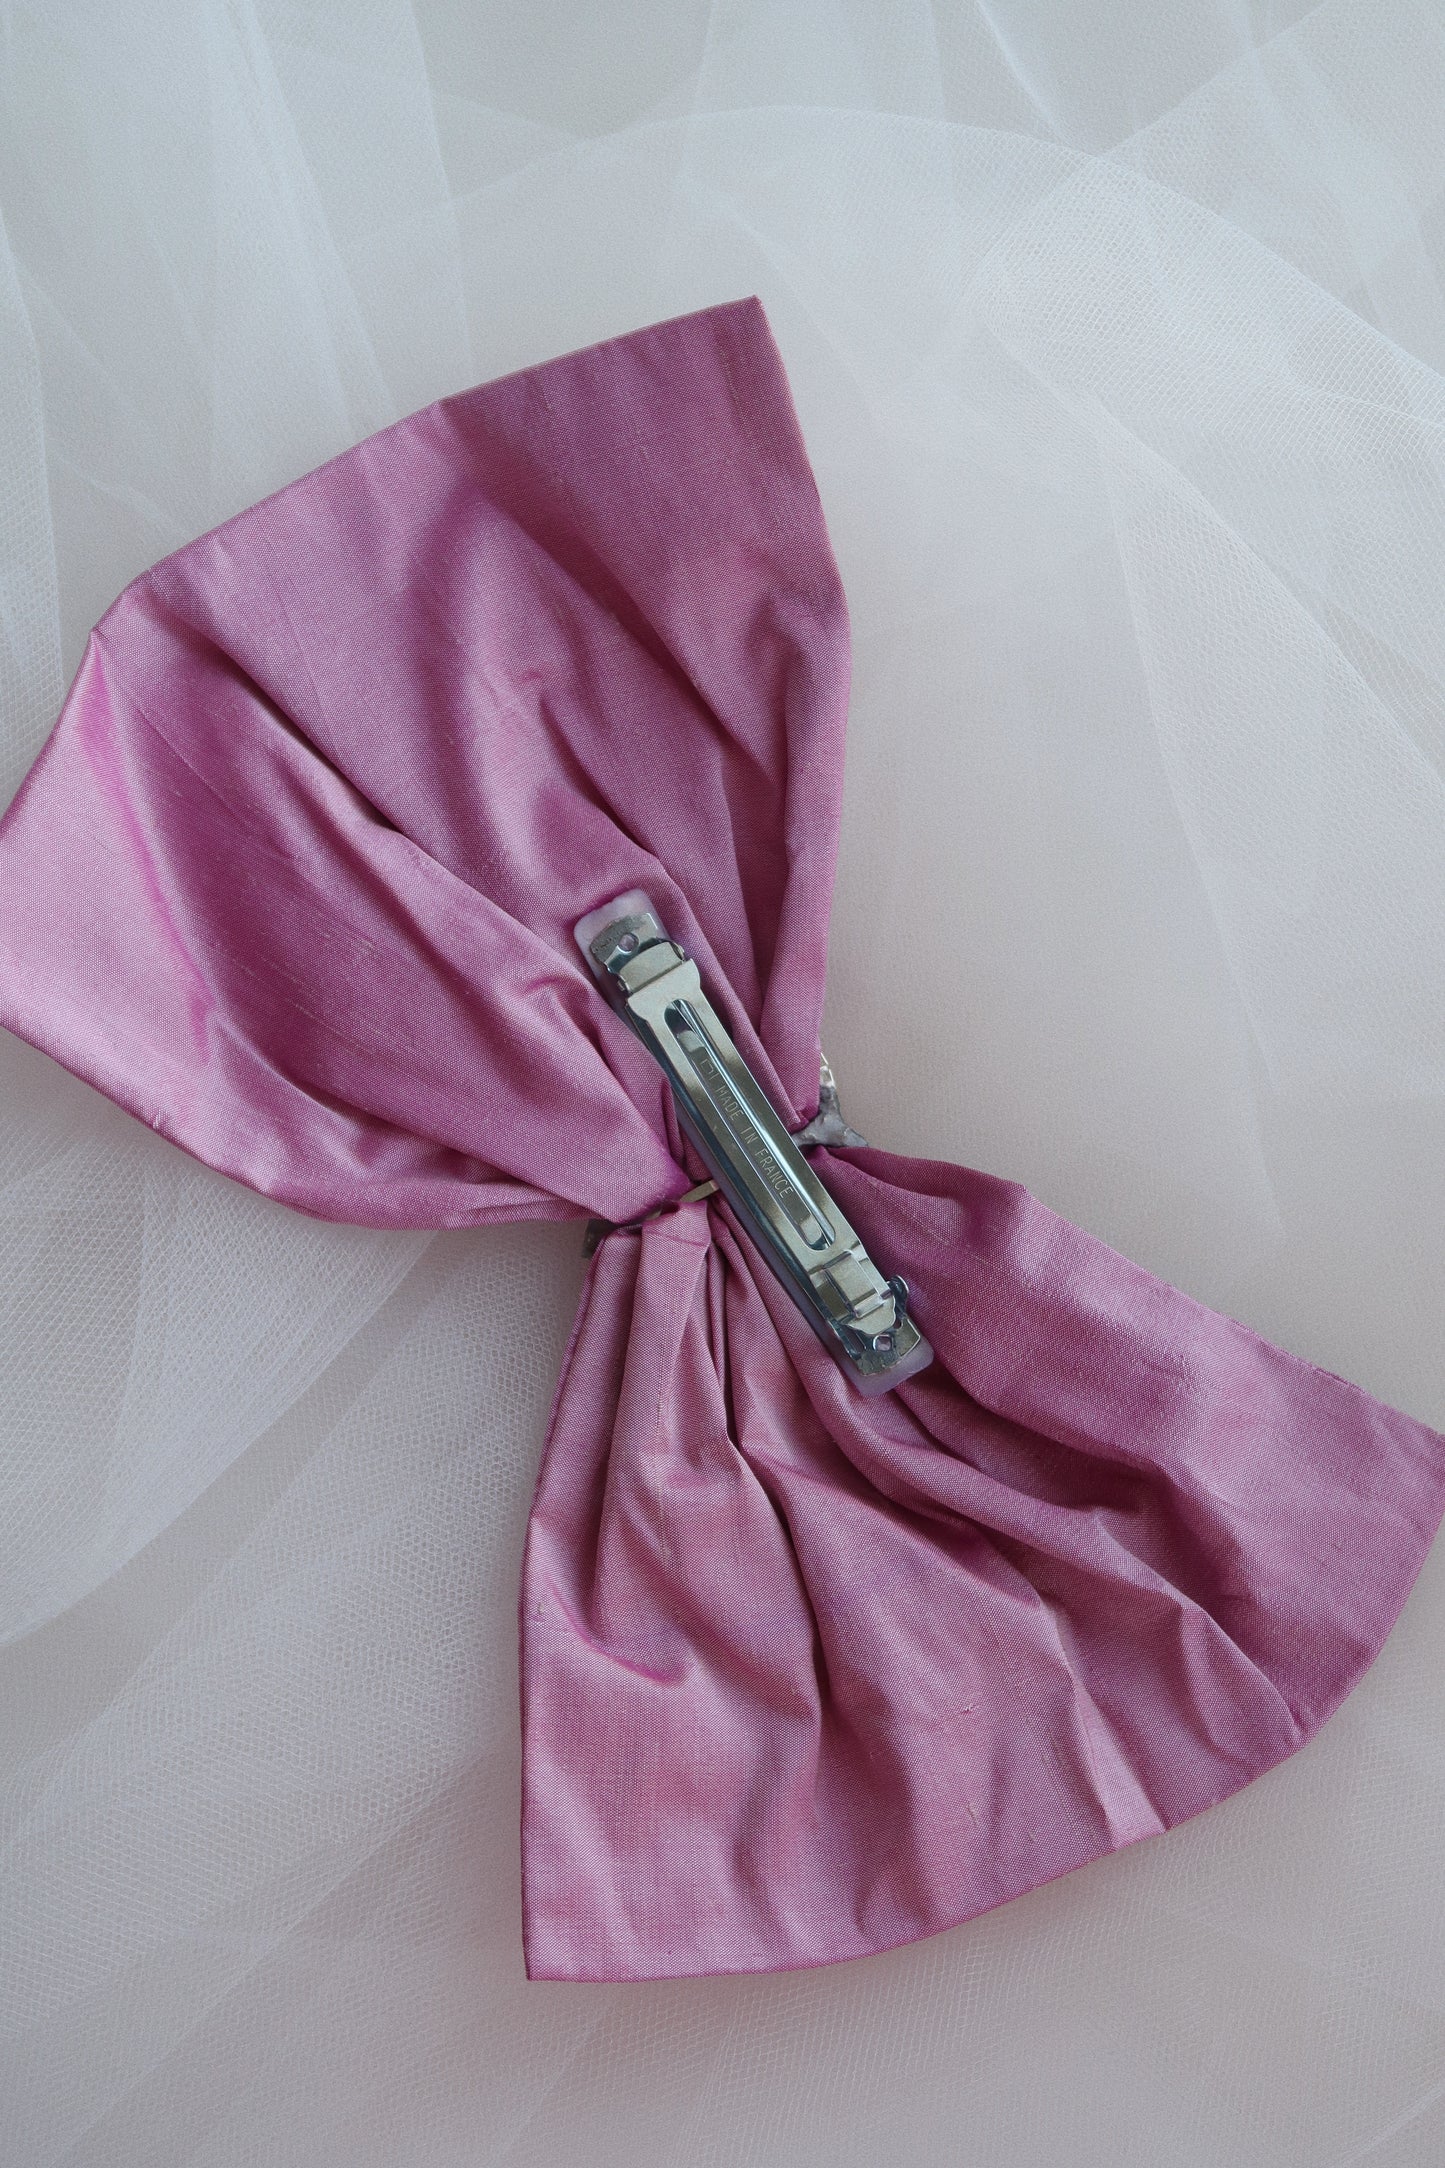 Merrfer Large Pink Bow Hair Clip